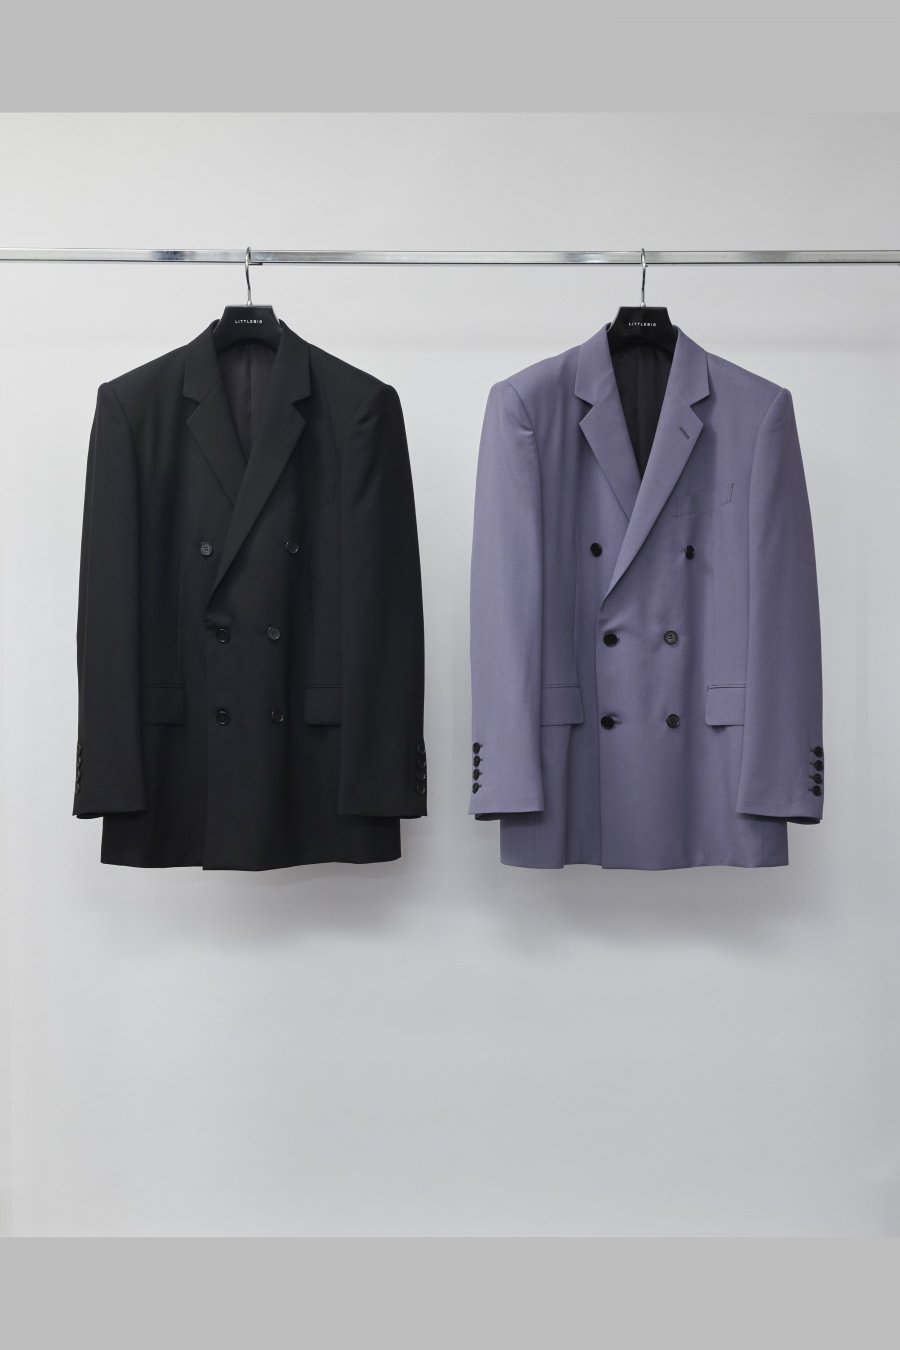 LITTLEBIG  22ss 6B Double Breasted Jacket(Black or Purple)<img class='new_mark_img2' src='https://img.shop-pro.jp/img/new/icons15.gif' style='border:none;display:inline;margin:0px;padding:0px;width:auto;' />